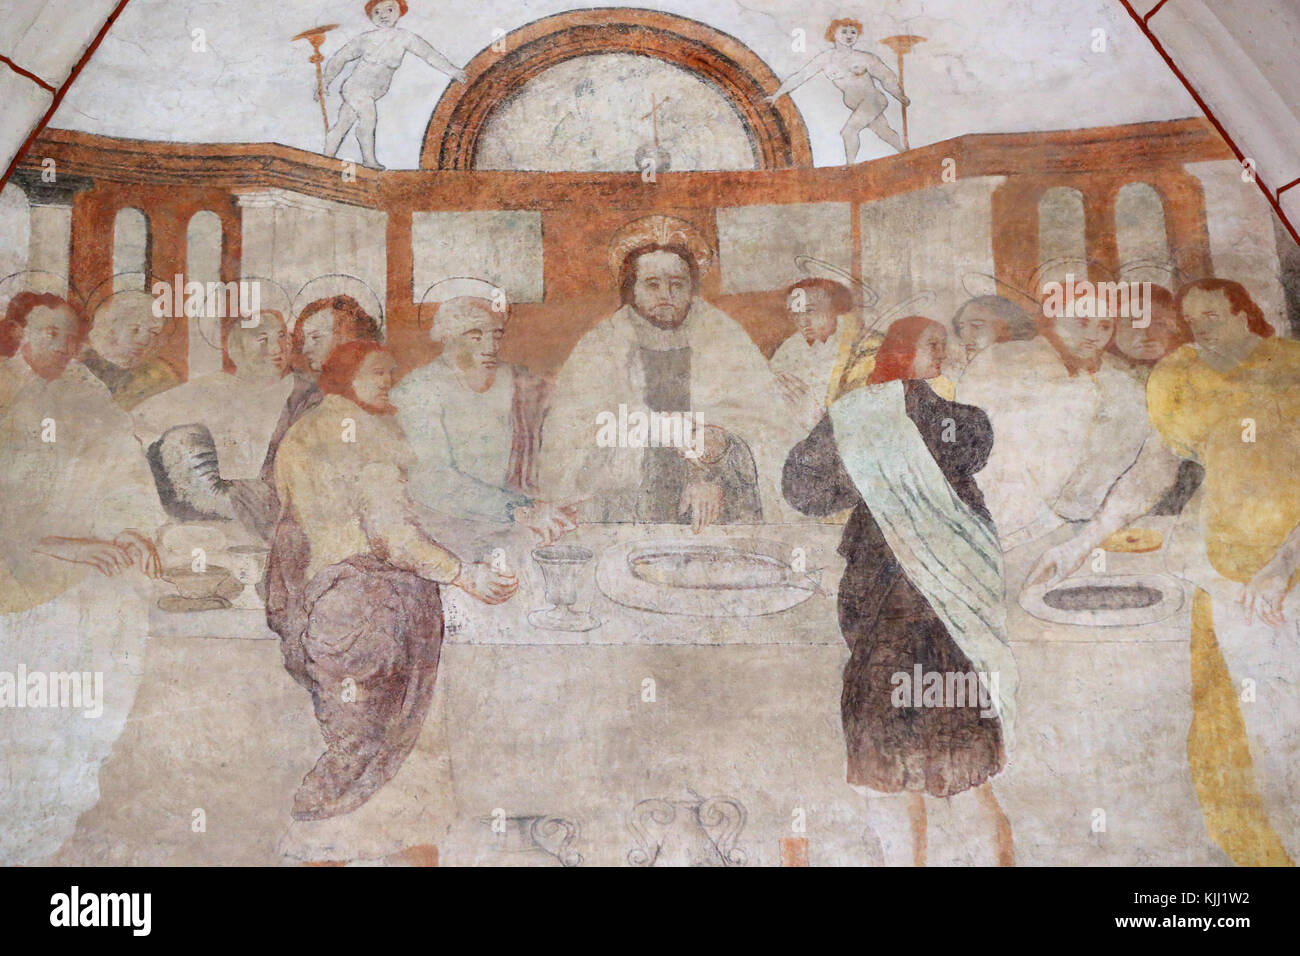 Vault de Lugny church.  16th century wall painting. Christ in his passion.  the Last Supper shared by Jesus and his disciples. France. Stock Photo